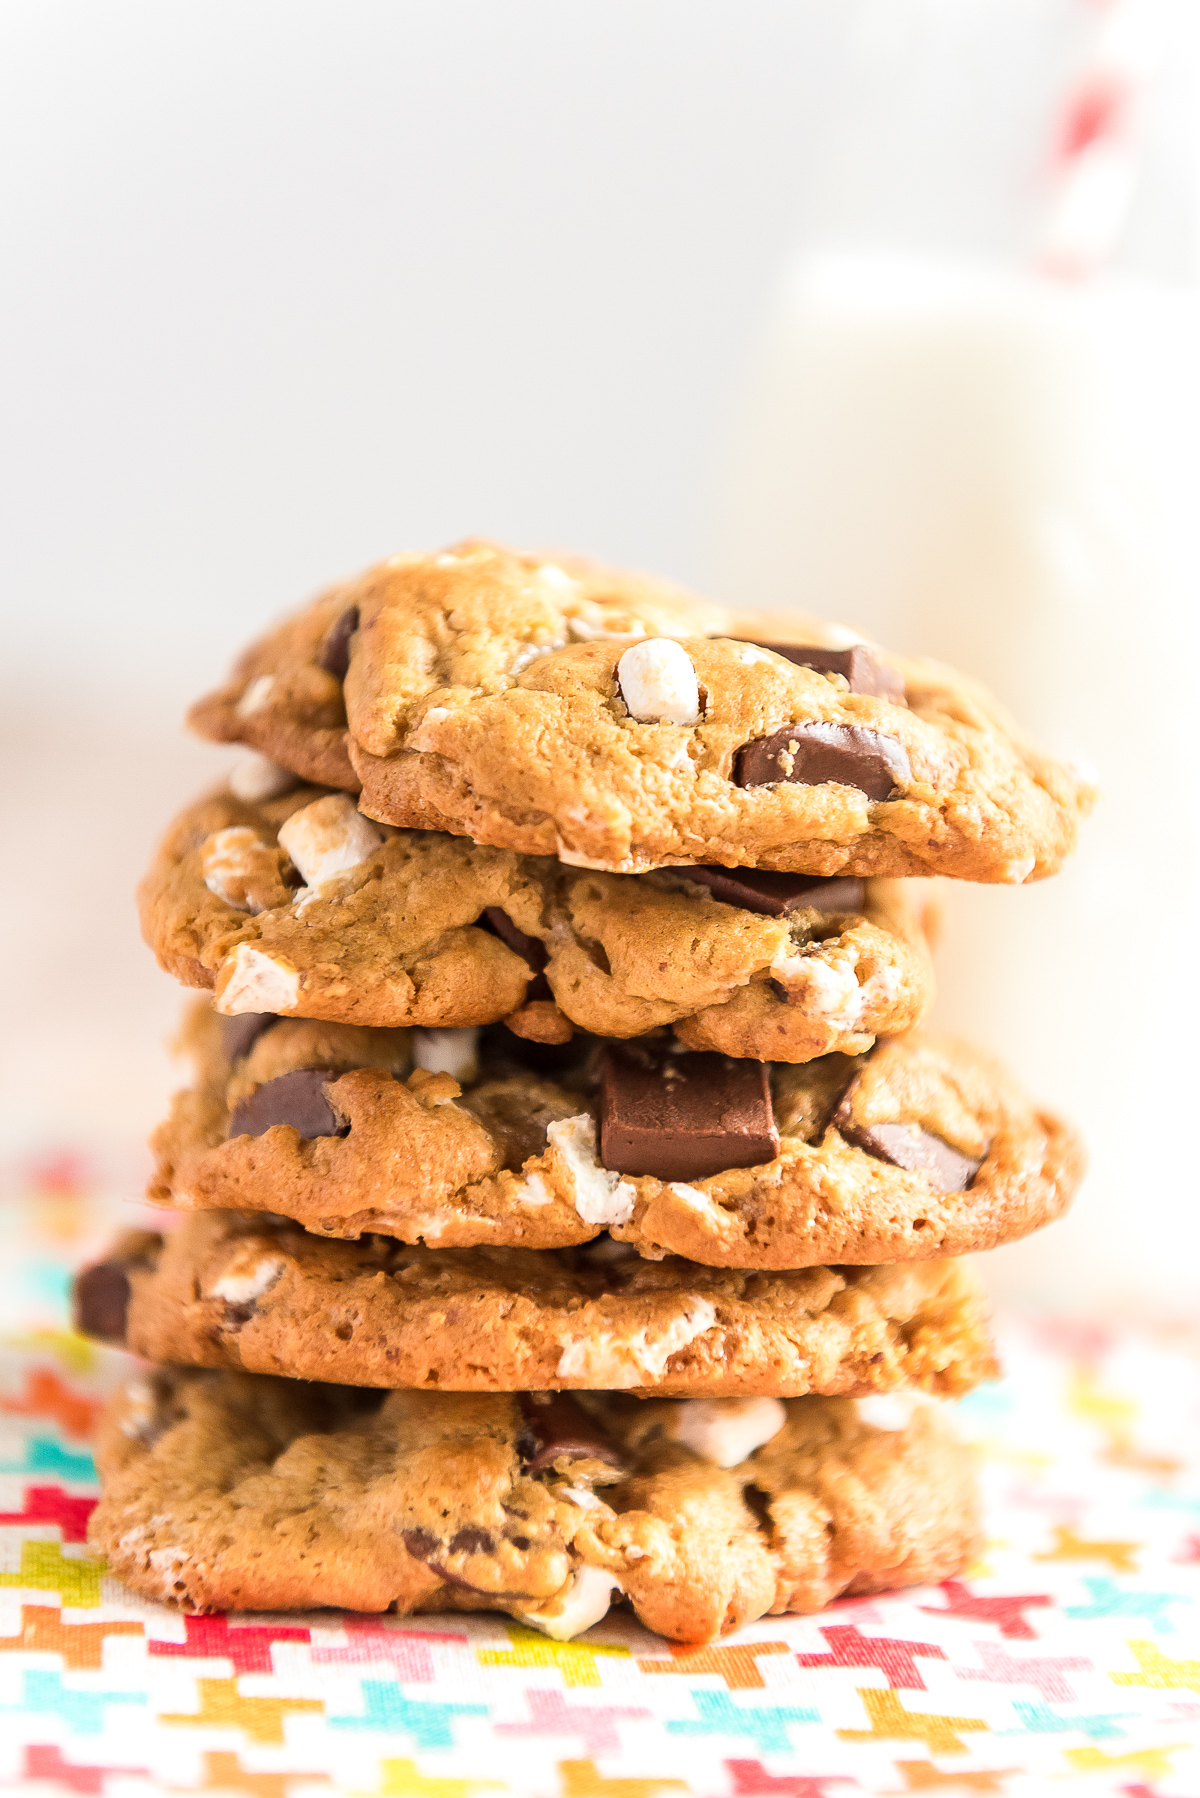 S'mores Cookies combine the flavors of marshmallows, chocolate, and graham crackers for a deliciously sweet cookie reminiscent of the classic summer treat!